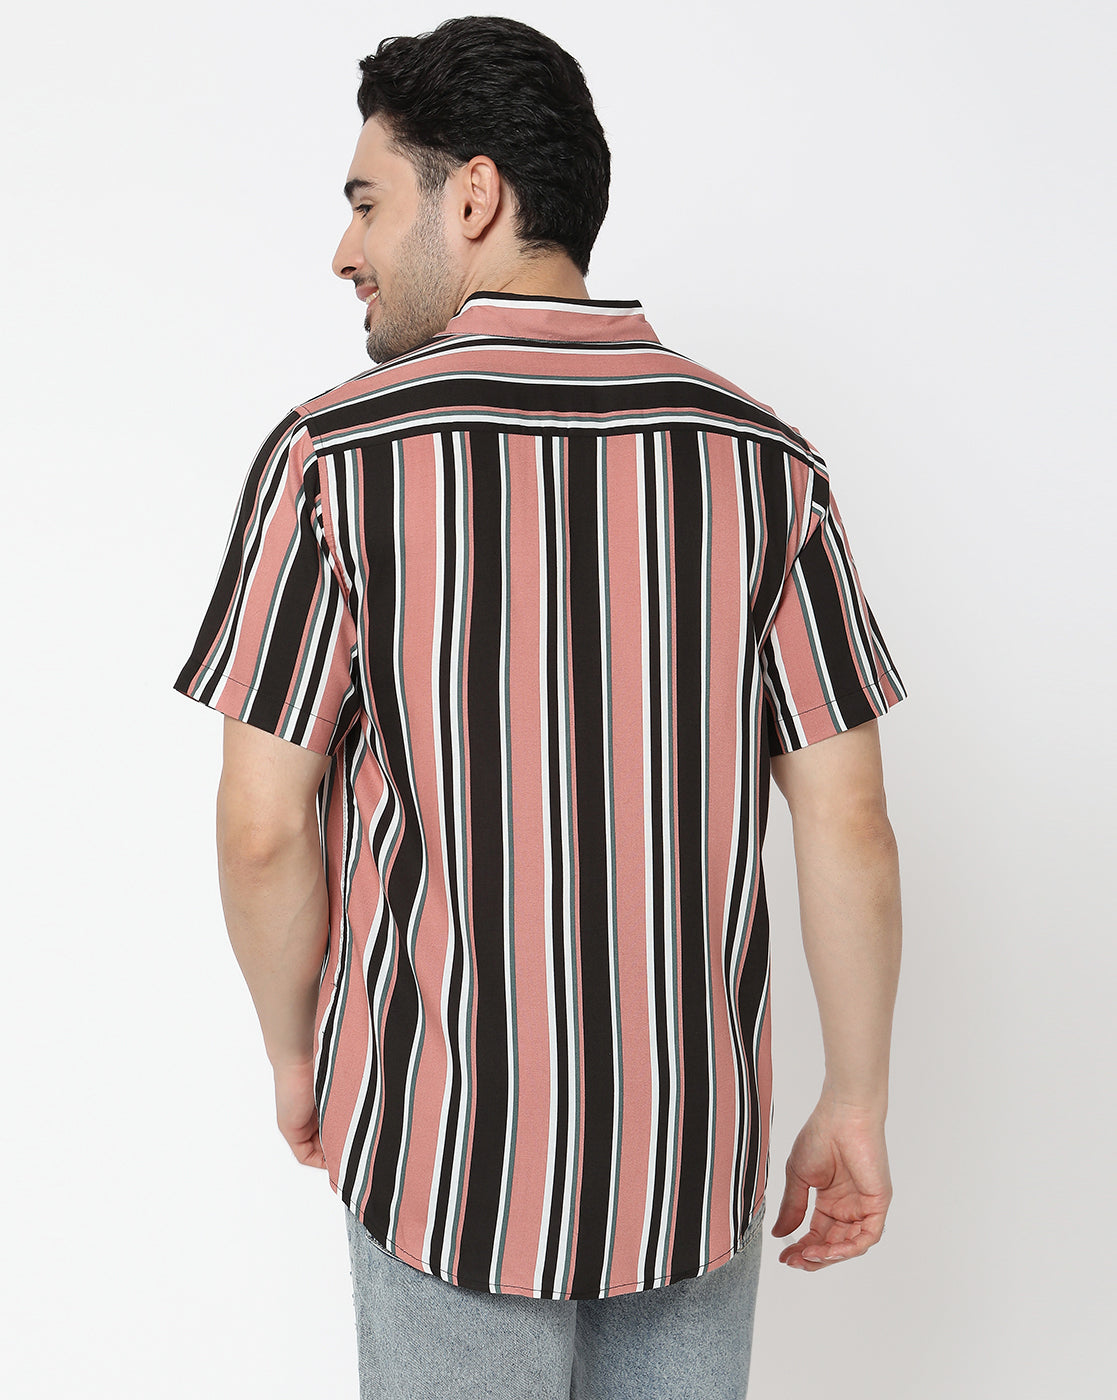 Peach and Black Thick and Thin Striped Rayon Half Sleeve Shirt